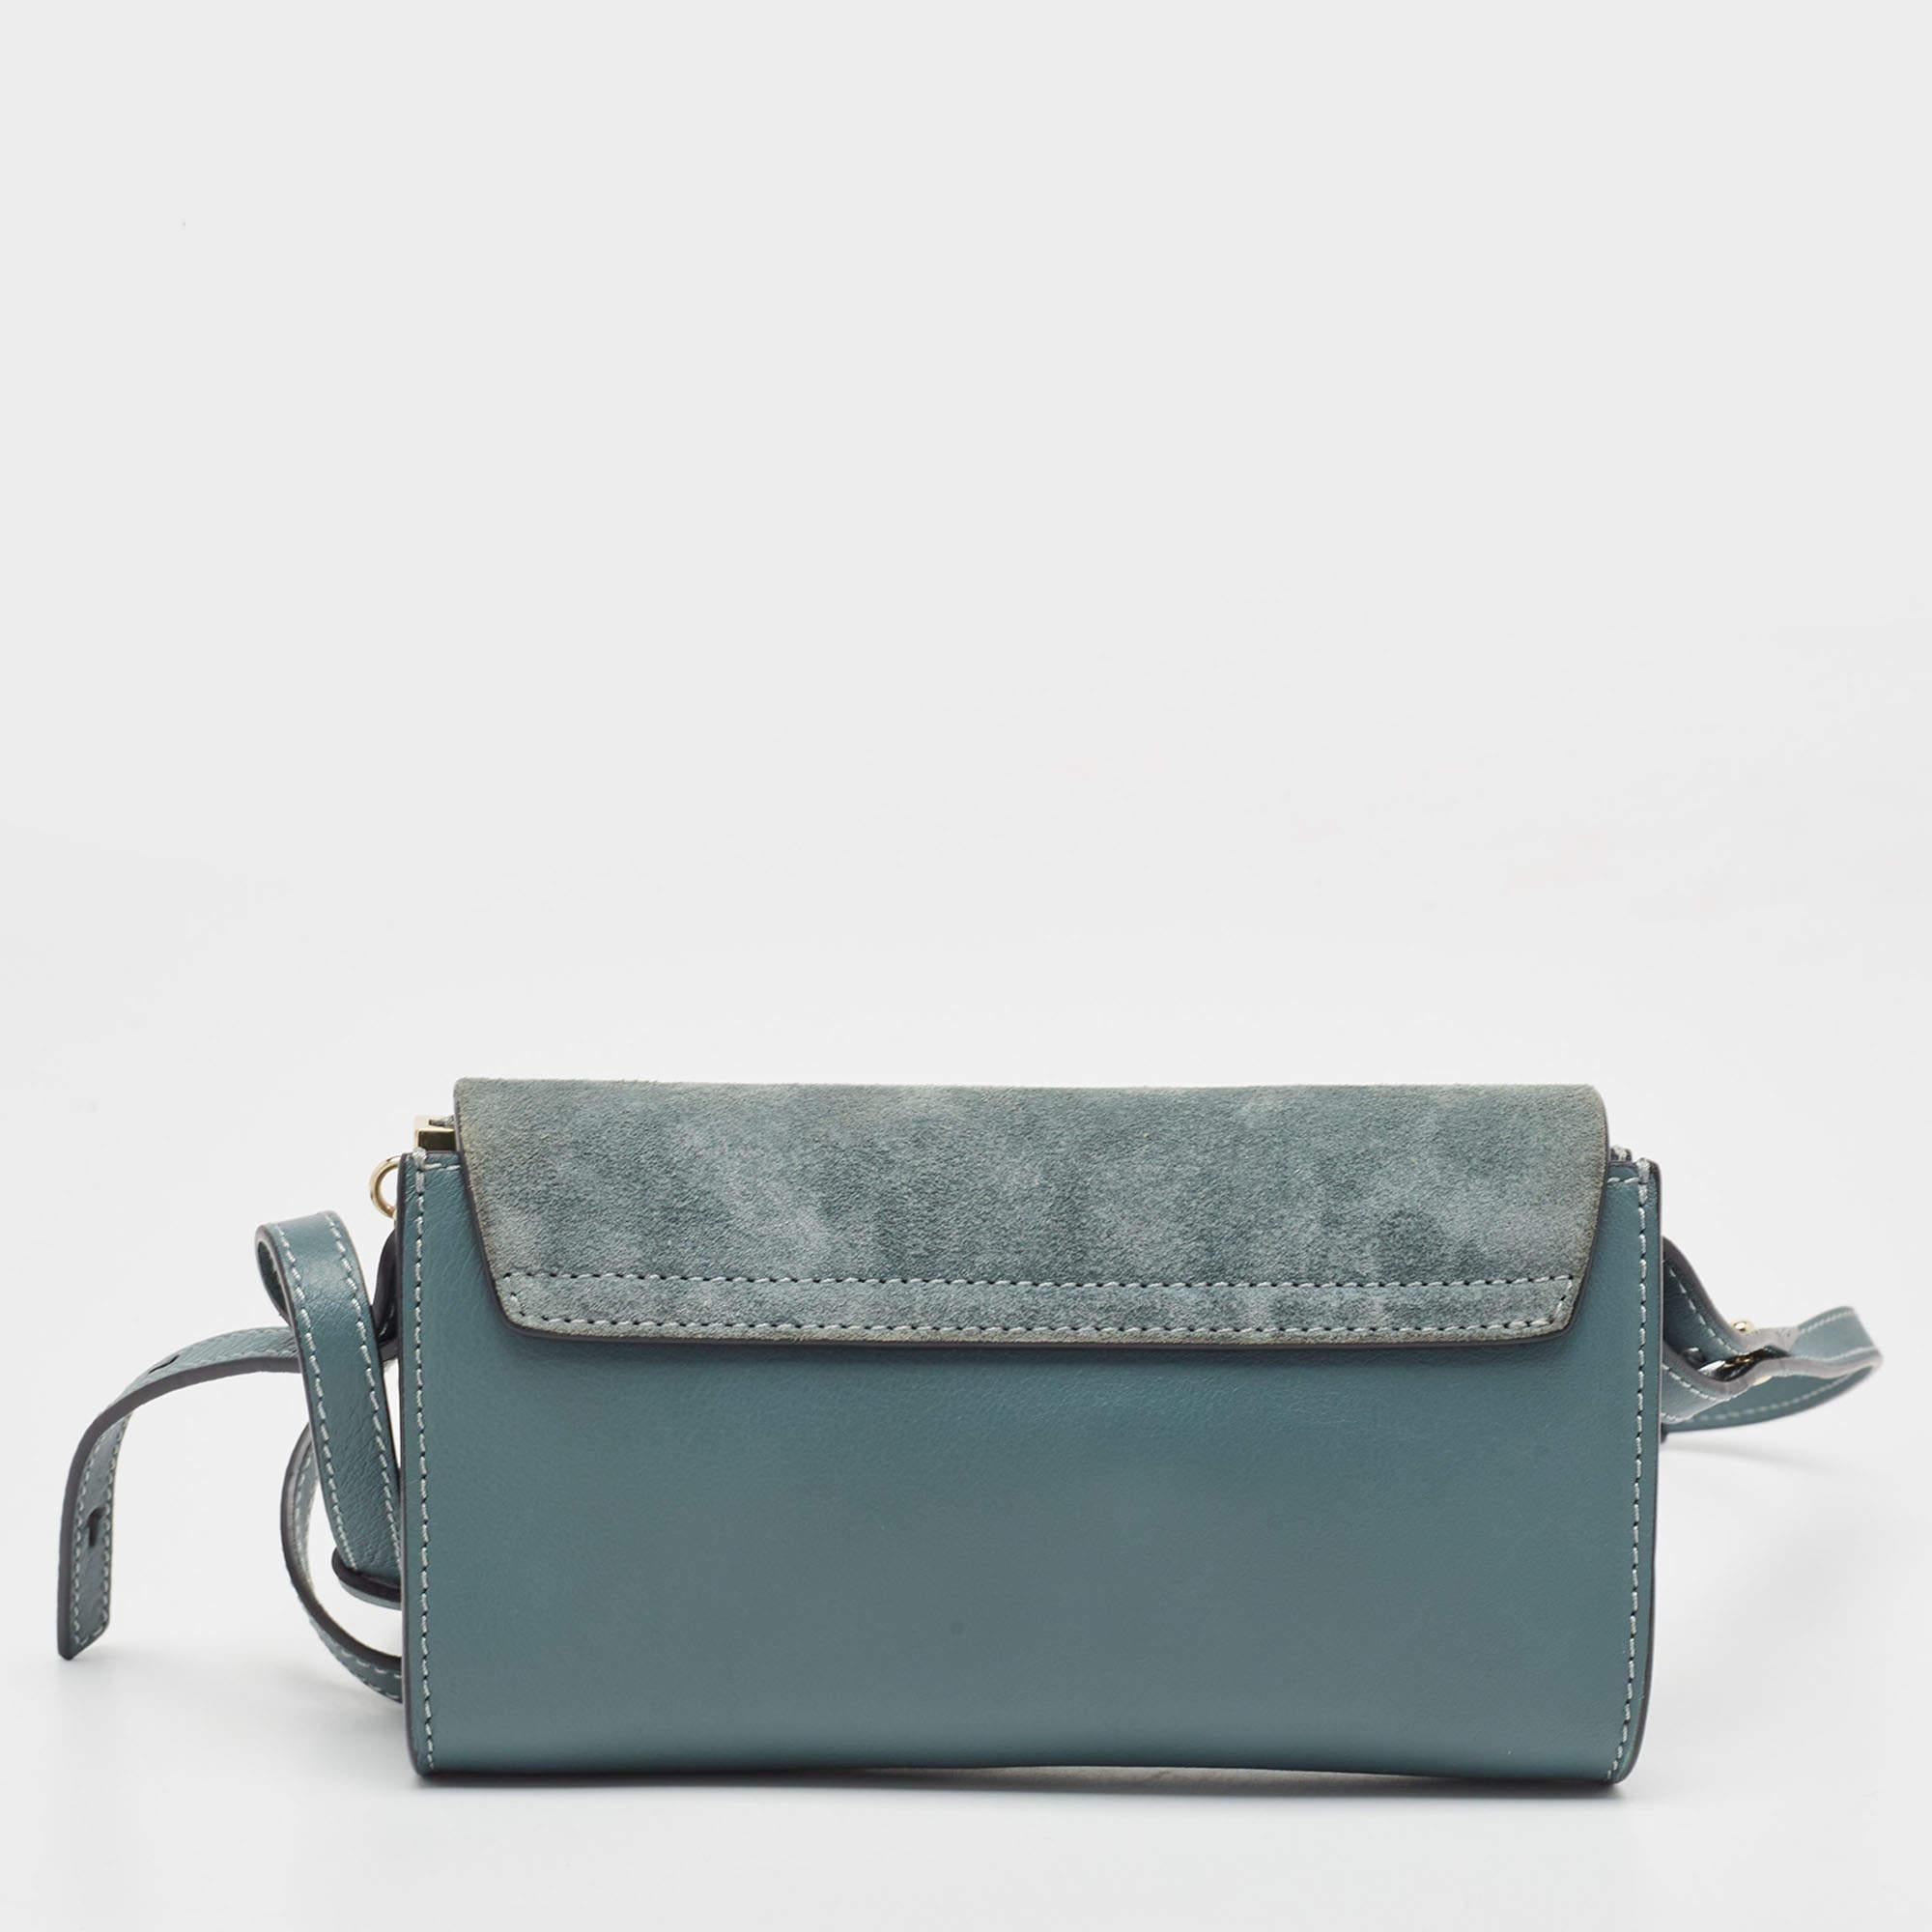 Express your personal style with this high-end crossbody bag. Crafted from quality materials, it has been added with fine details and is finished perfectly. It features a well-sized interior.

Includes: Original Dustbag

